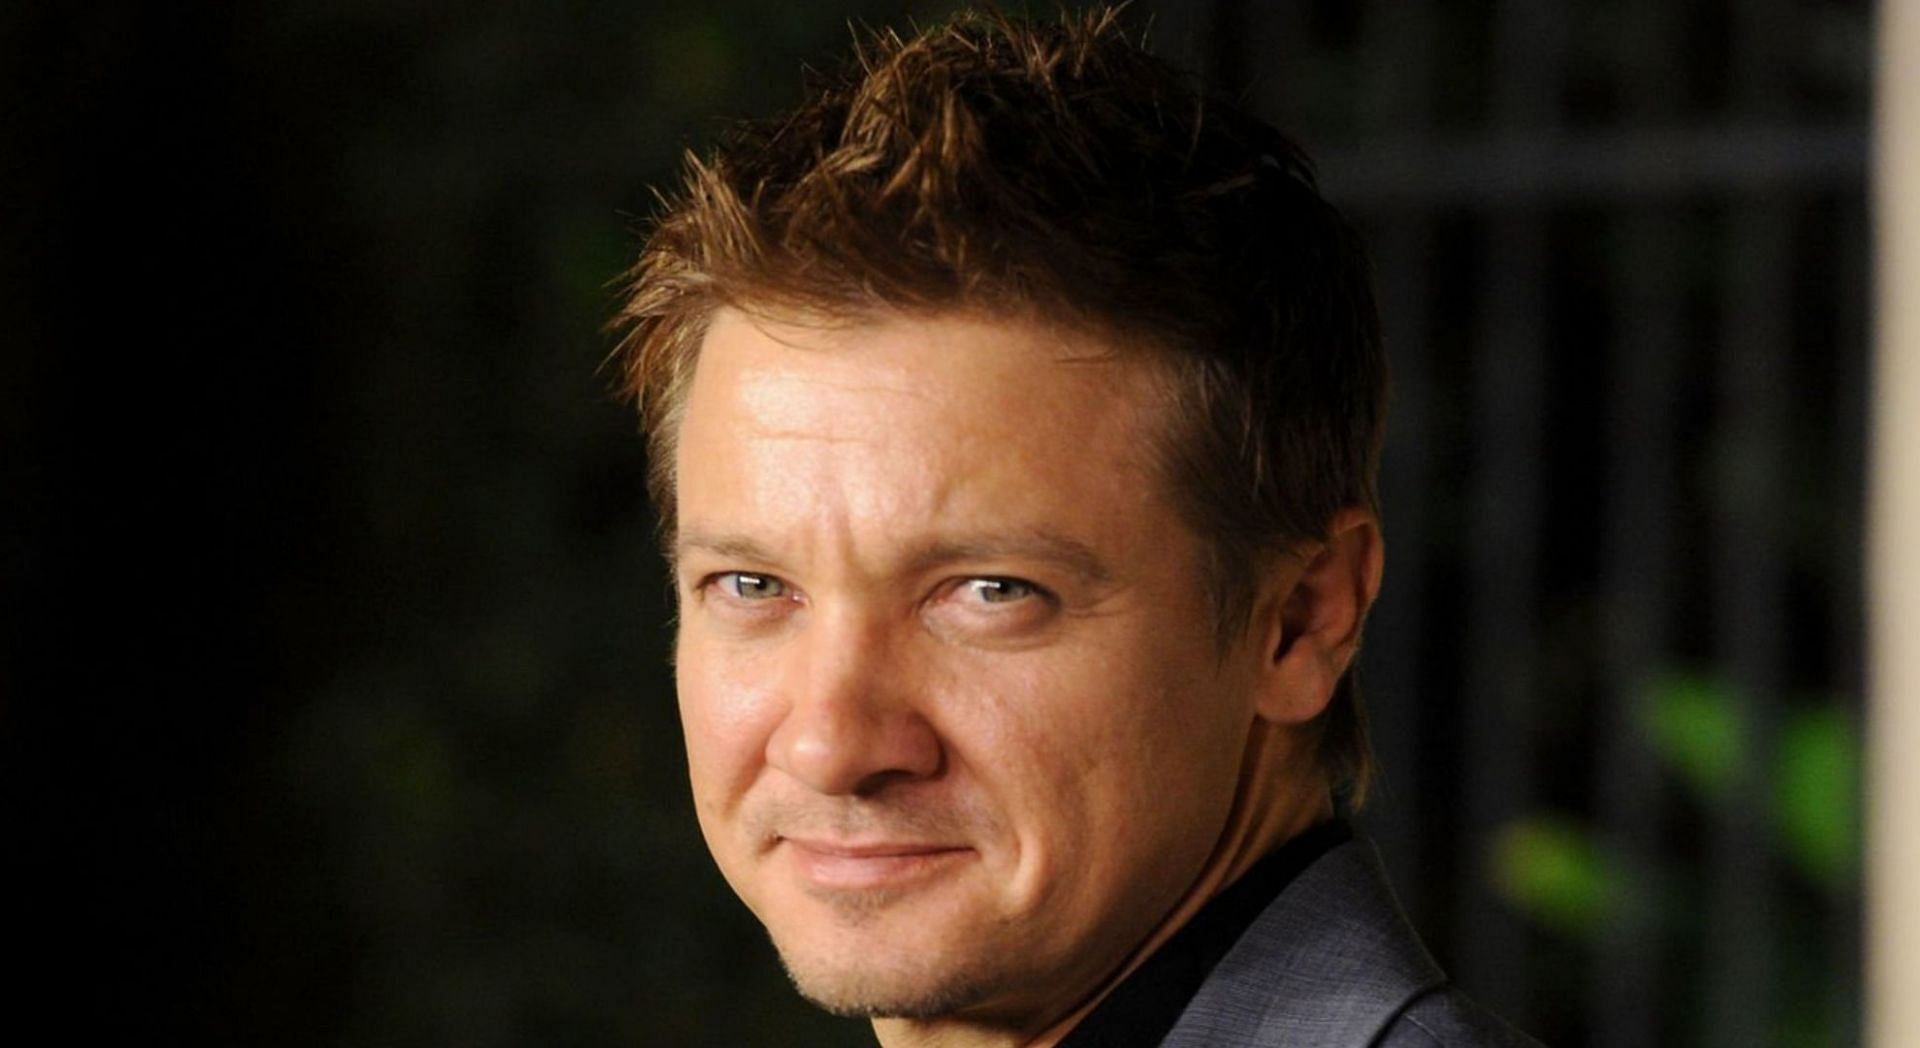 Jeremy Renner shares heartwarming video with mom and sister from ICU (Image via Getty Images)